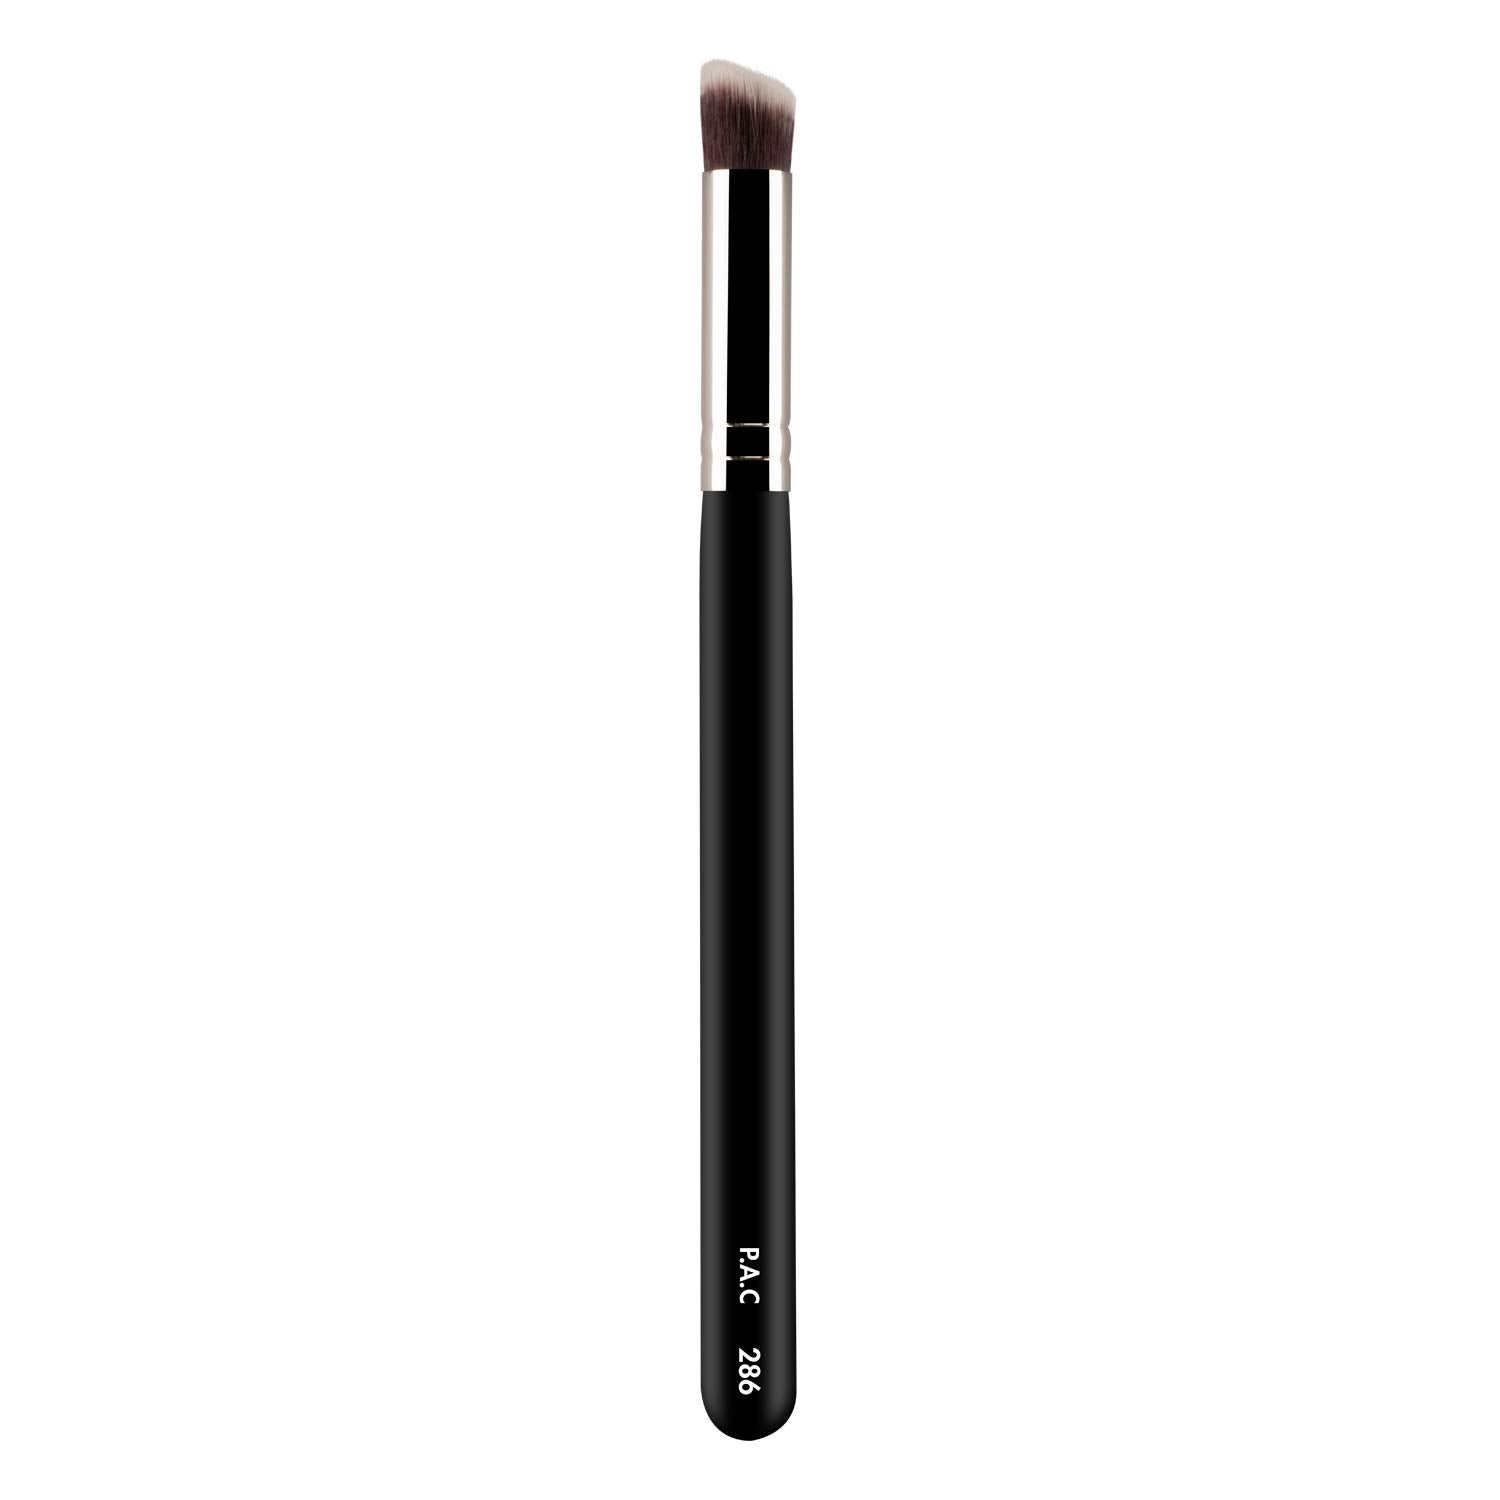 PAC Concealer Brush 286 PAC